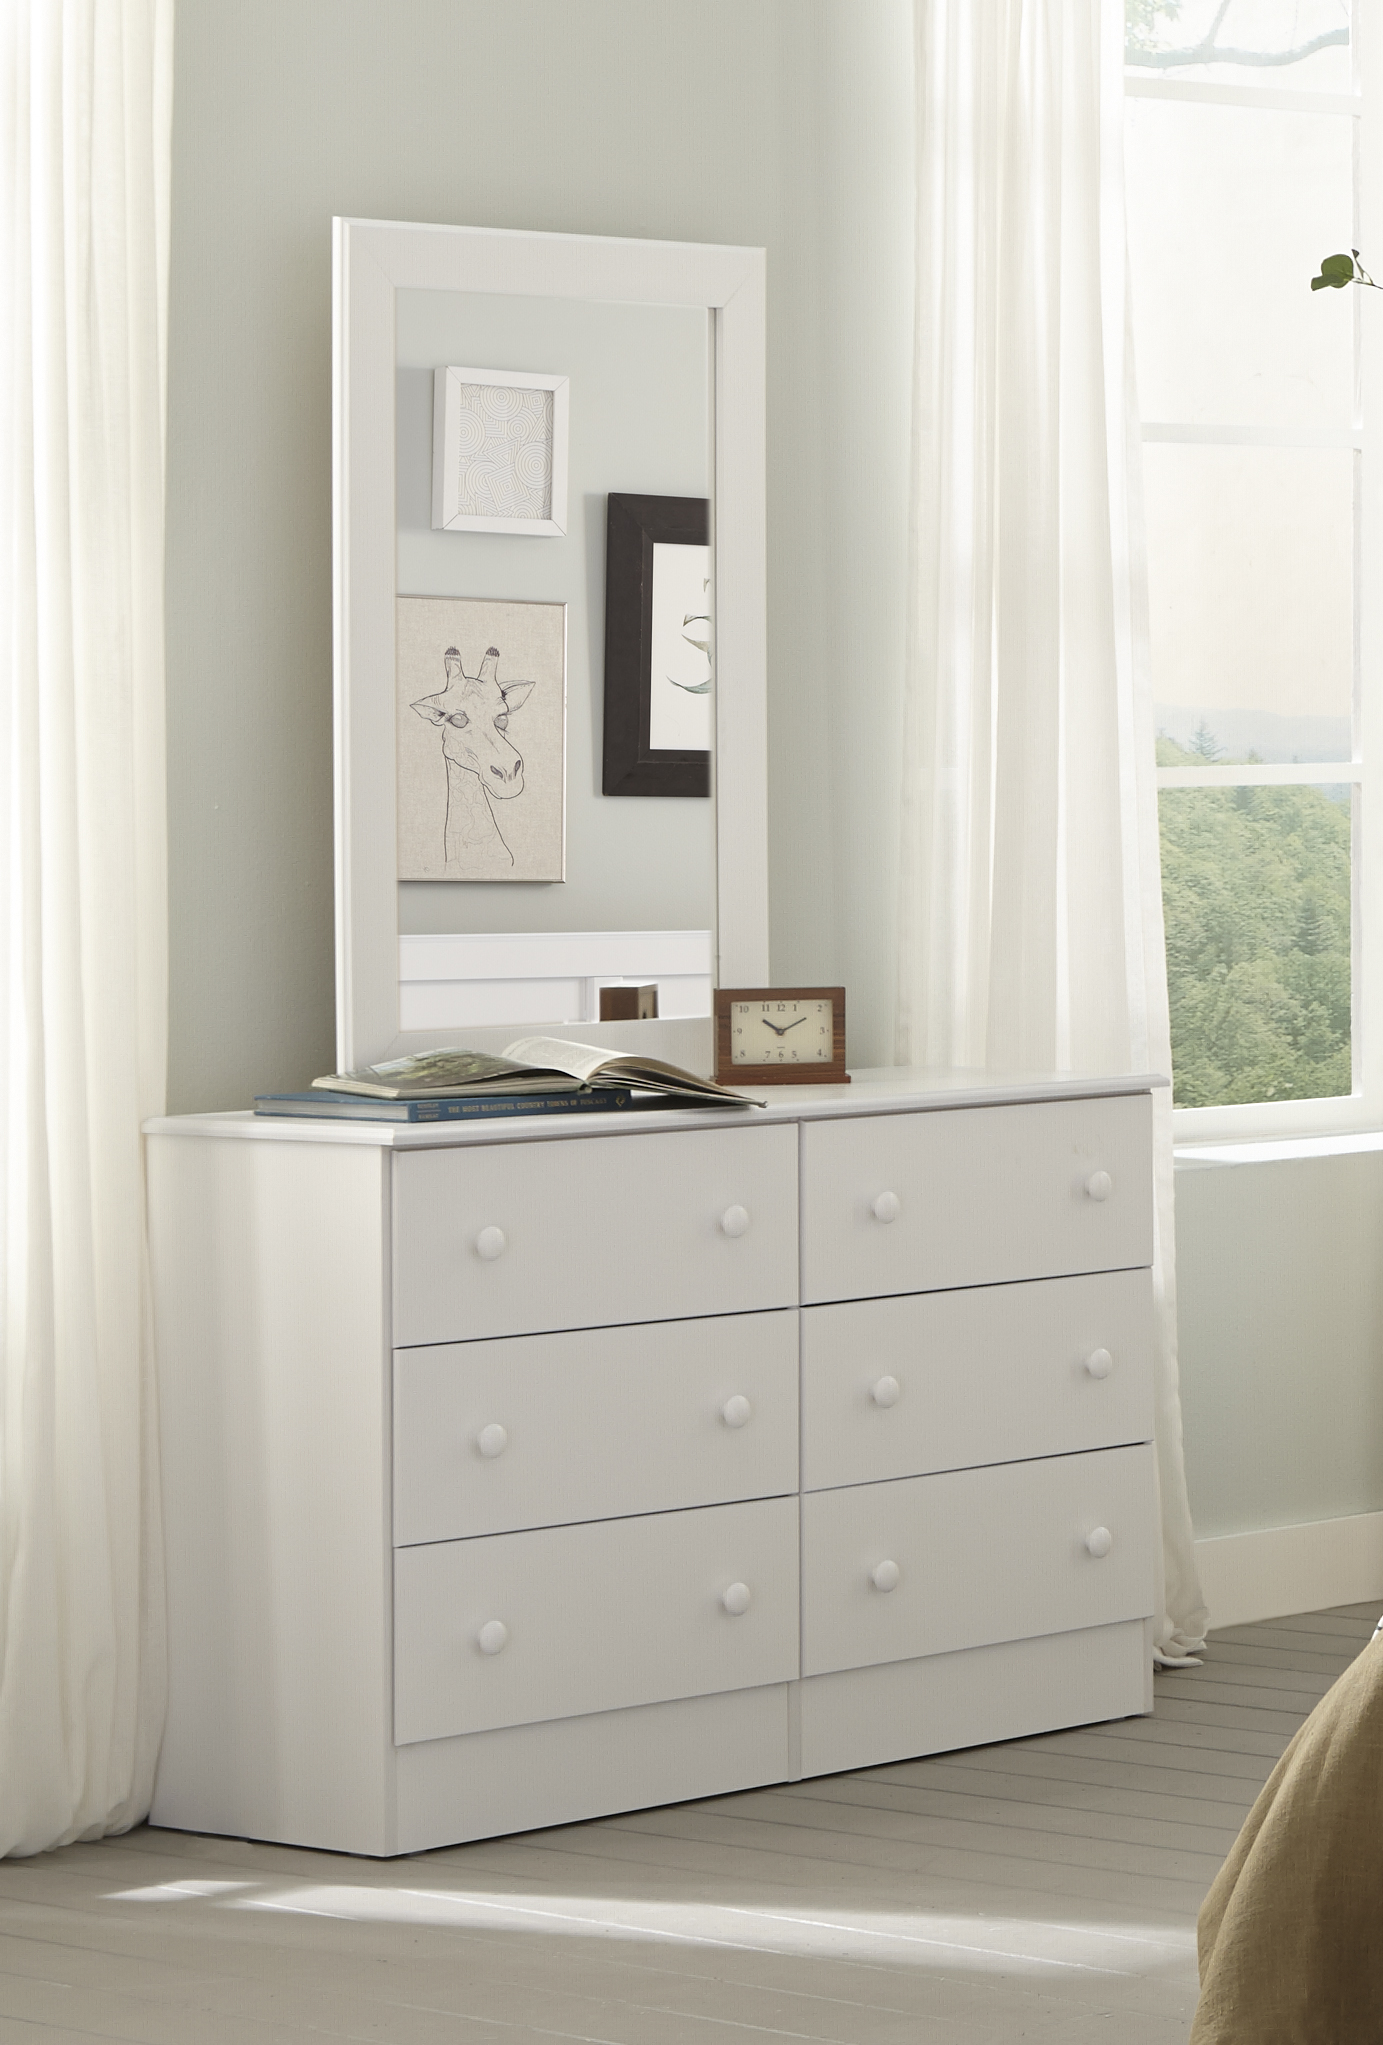 American Furniture Classics Classic White Collection 193K6T Six Piece White Bedroom set including Twin Headboard, Five Drawer Chest, Six Drawer Dresser, Mirror, and two Night Stands. - image 3 of 8